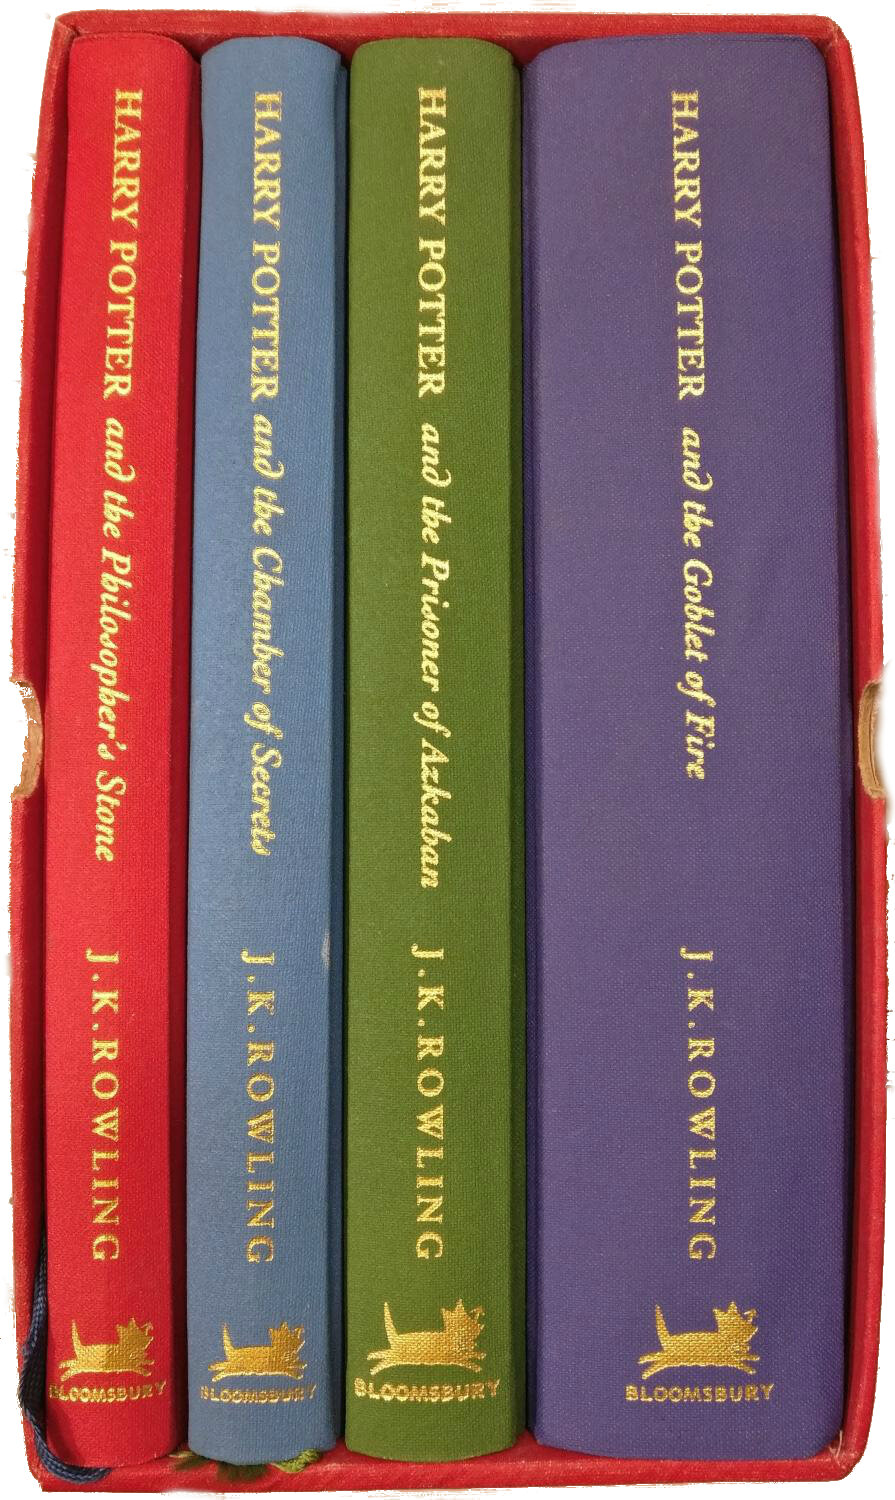 Harry Potter and the Prisoner of Azkaban NEW 4 Books Collection Hardcover Set 